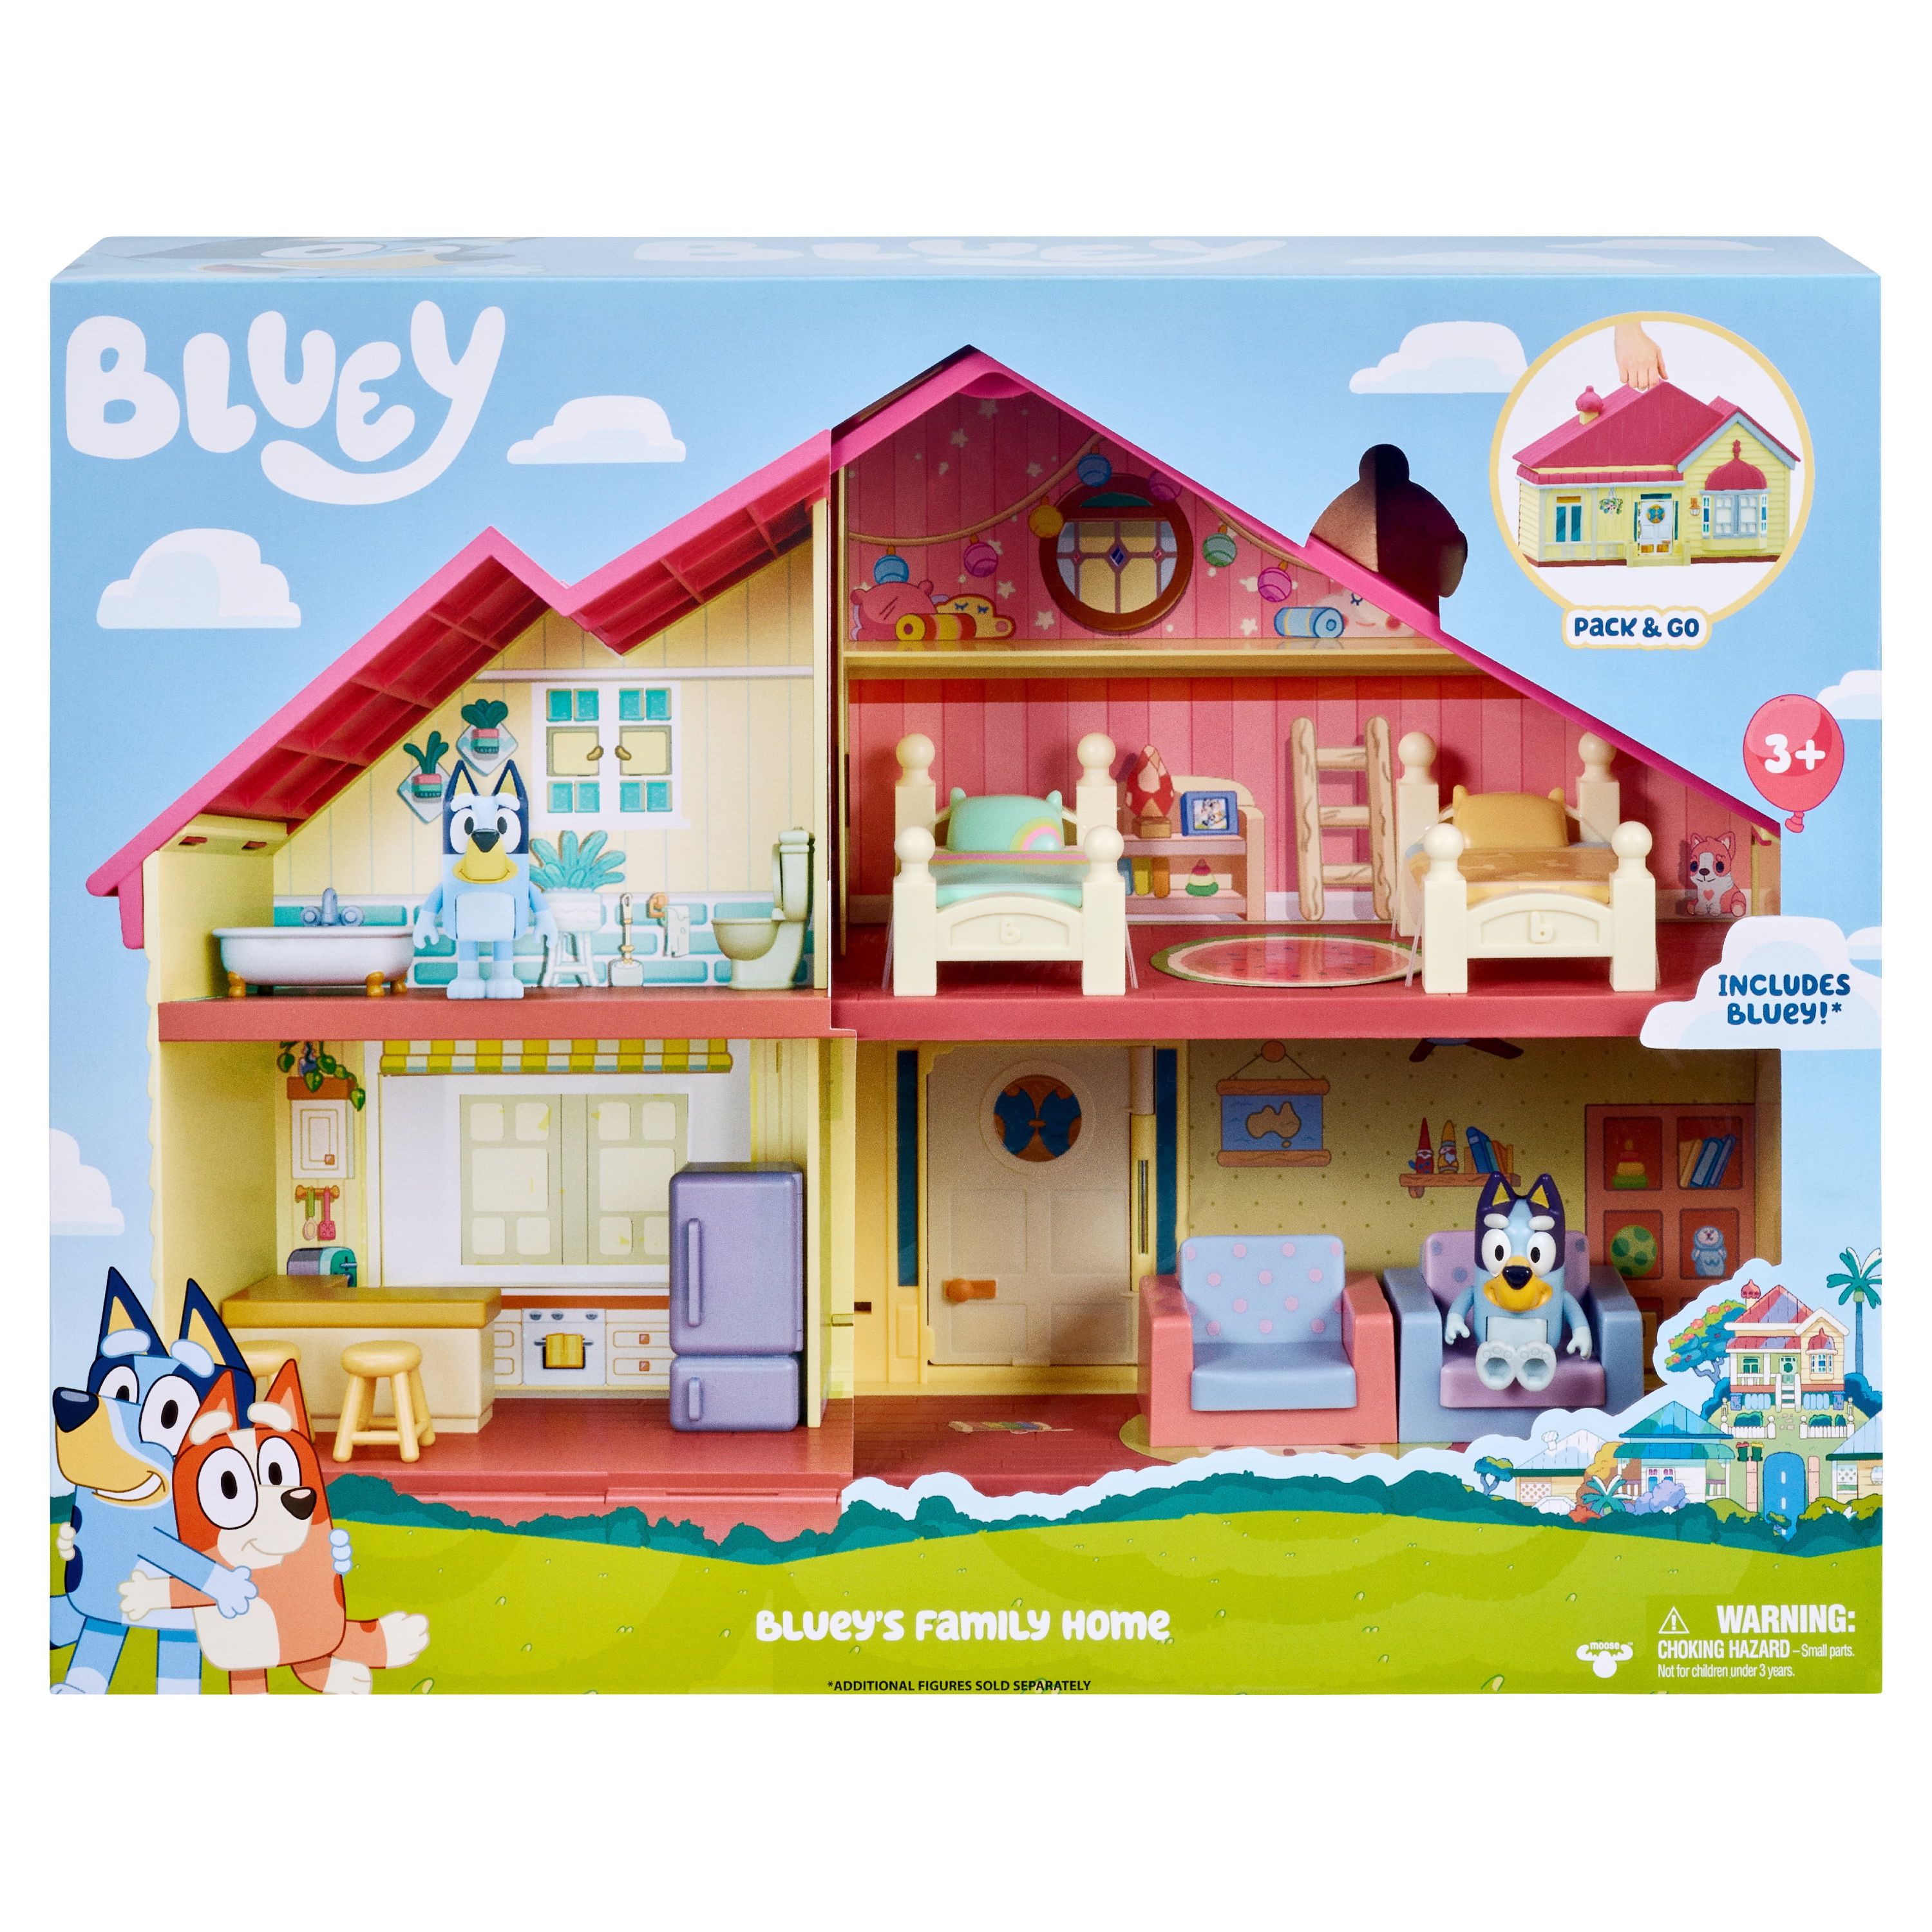 Bluey Family Home - Bluey 2.5-3" Figure with Home Playset - image 3 of 15